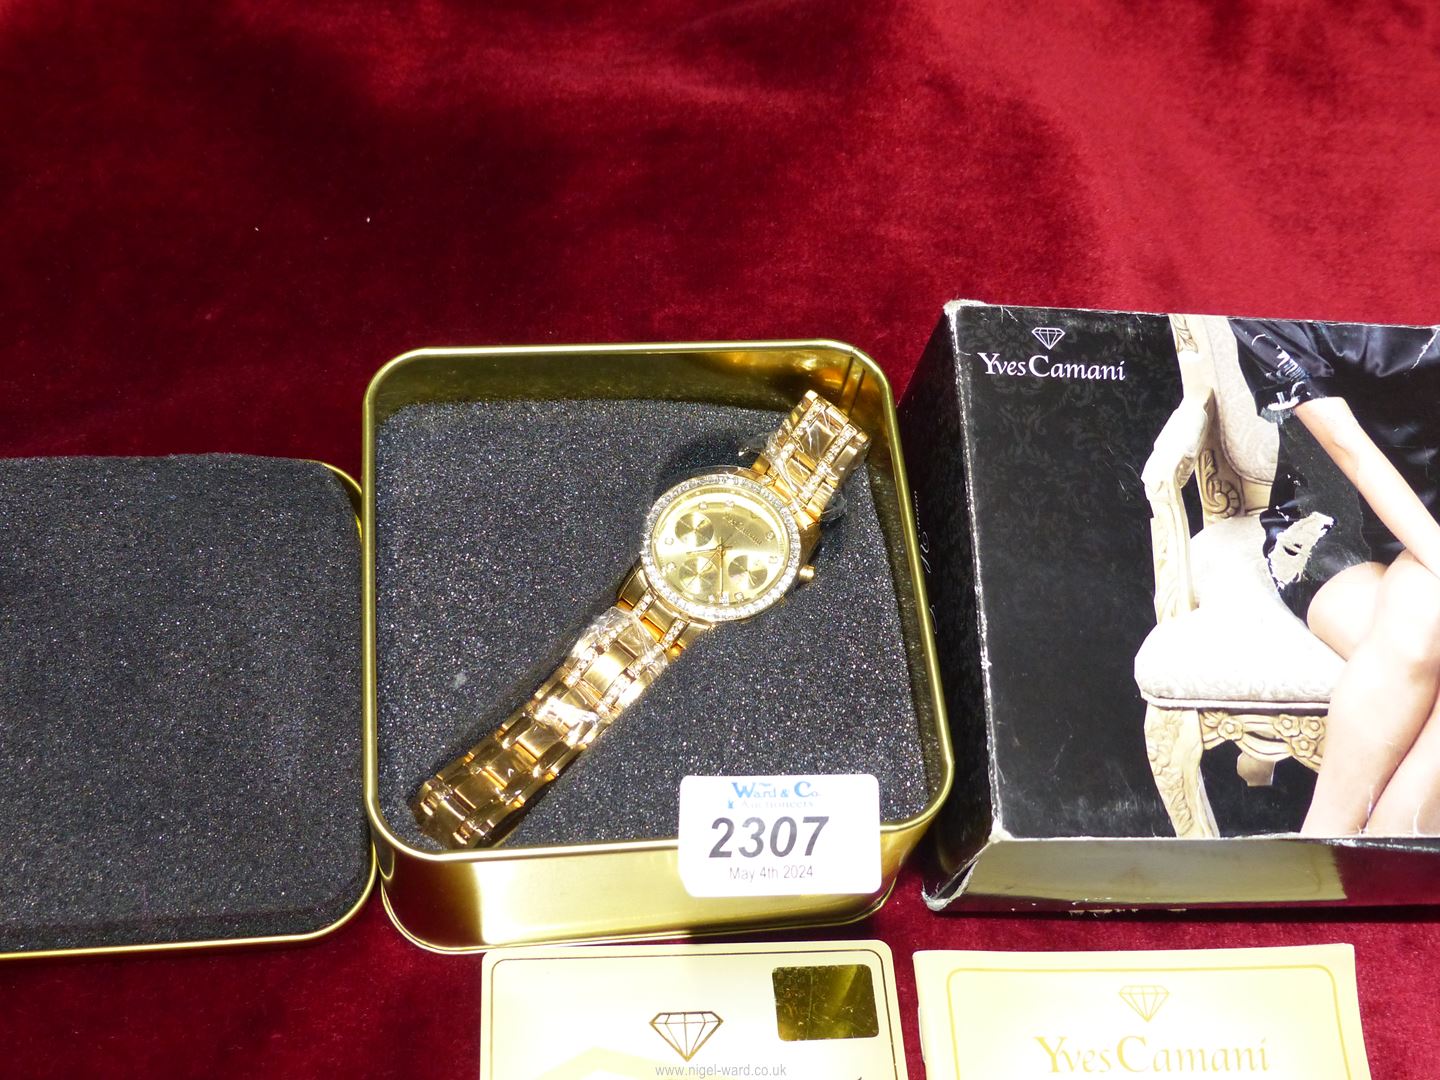 A Yves Camani gold coloured "Bling" watch, in tin. - Image 3 of 3